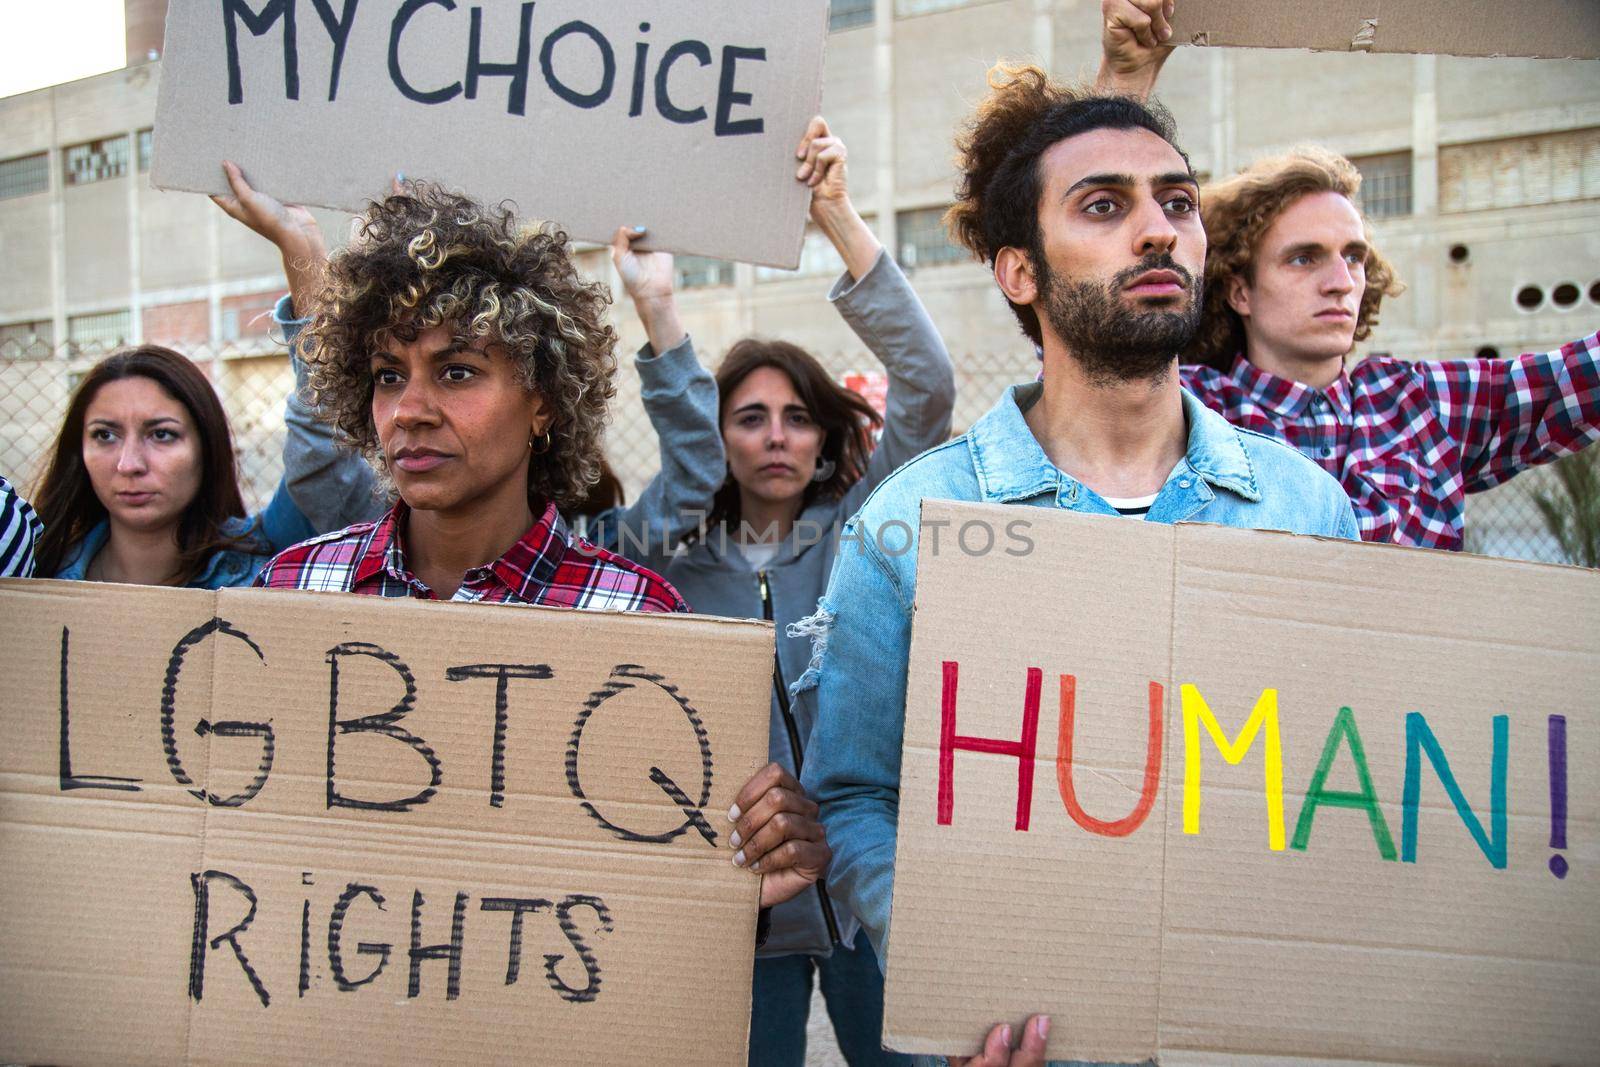 Multiracial group of people march together protesting on a demonstration for LGBT rights holding cardboard banners. by Hoverstock